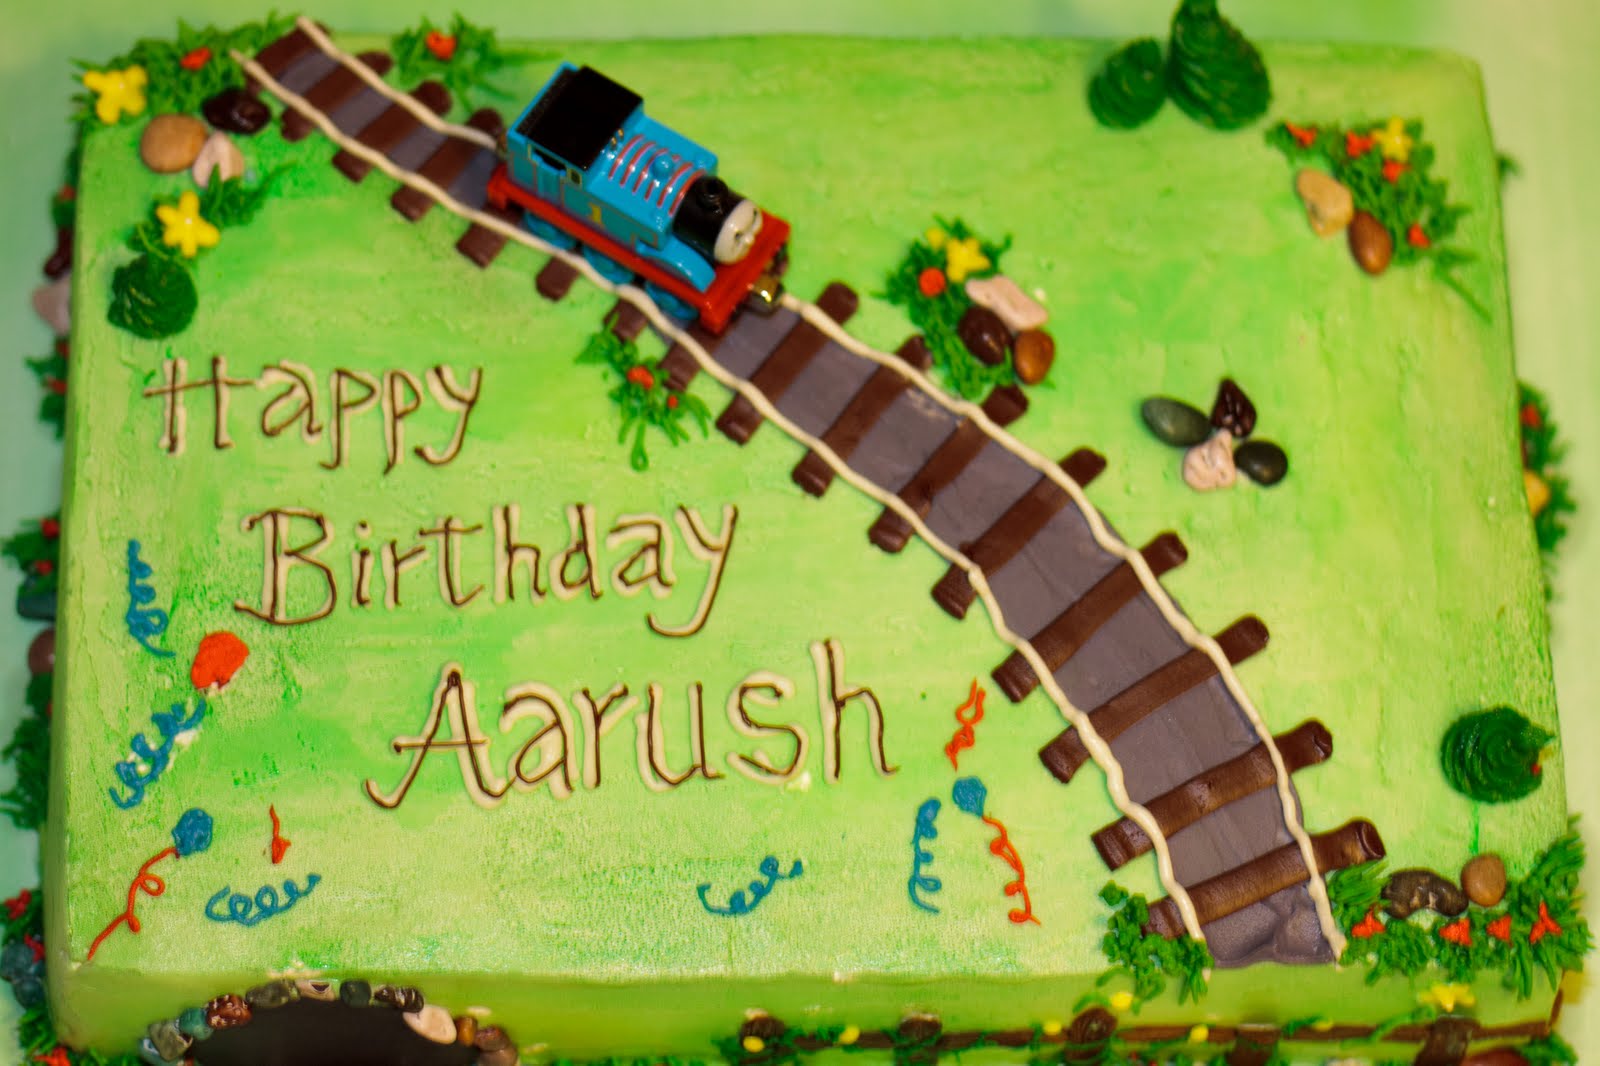 Thomas the Tank Engine Cake | Baked In Heaven